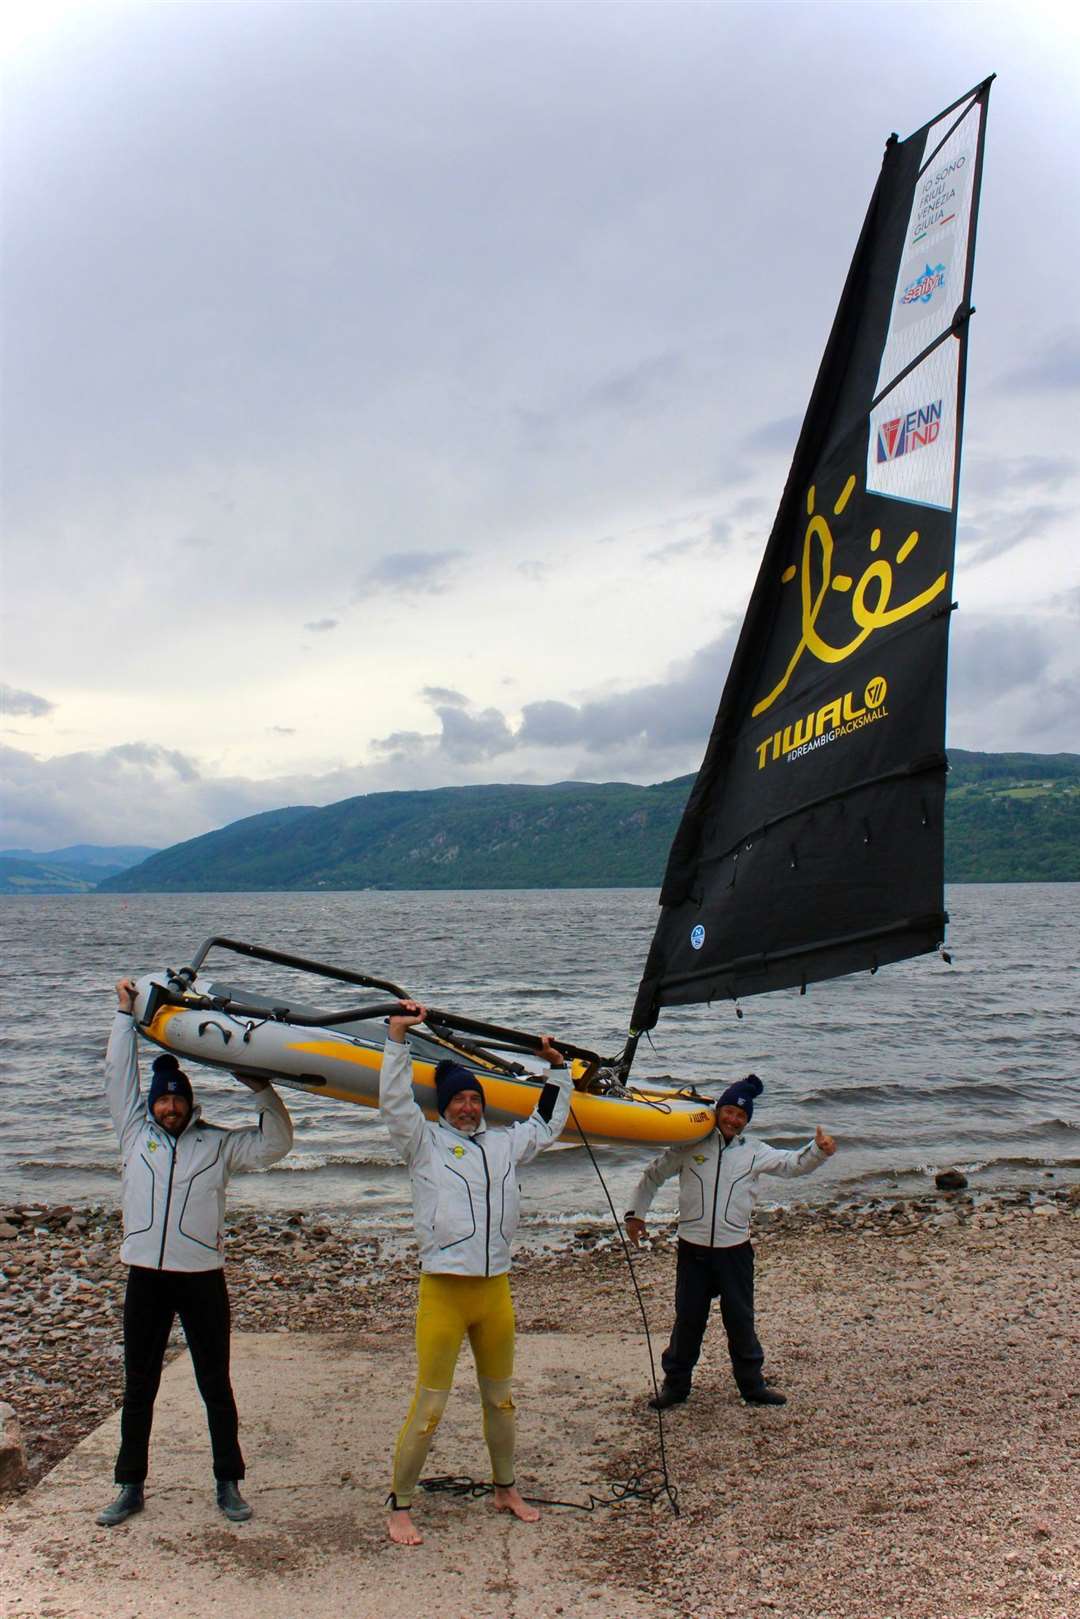 The crew with one of their Tiwal sailboats.